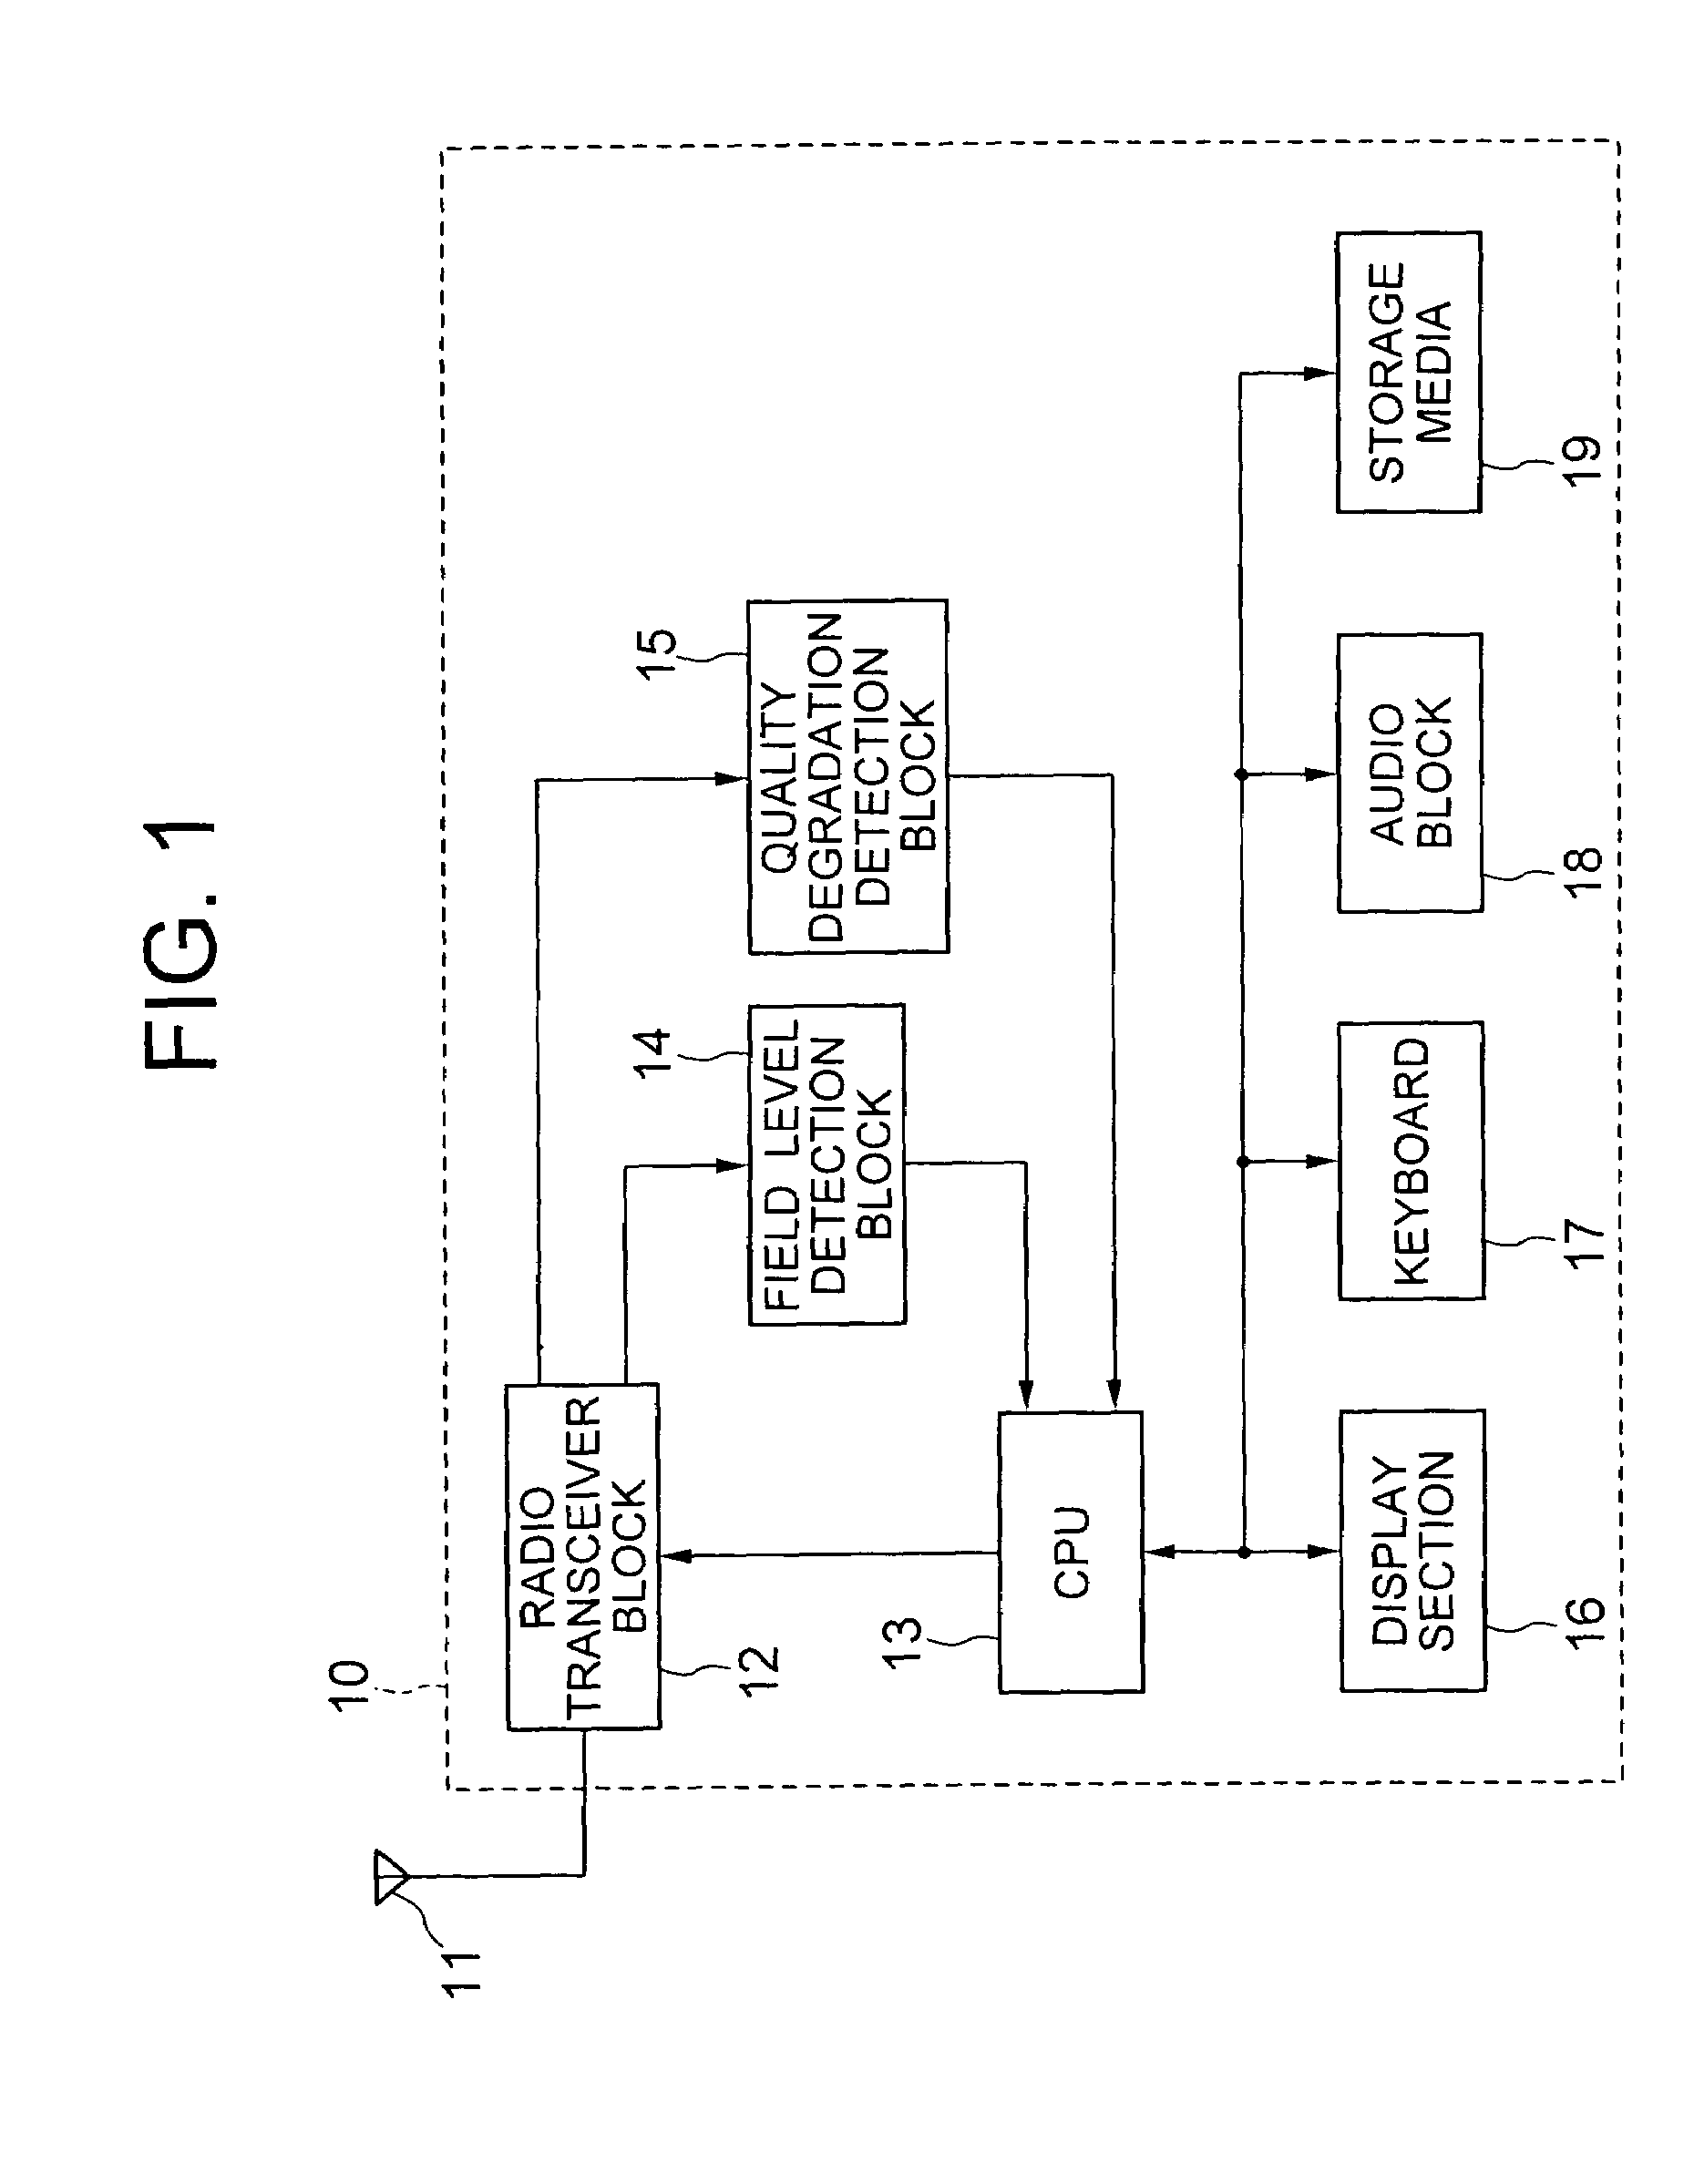 Mobile station executing alarm processing of a degraded communication quality